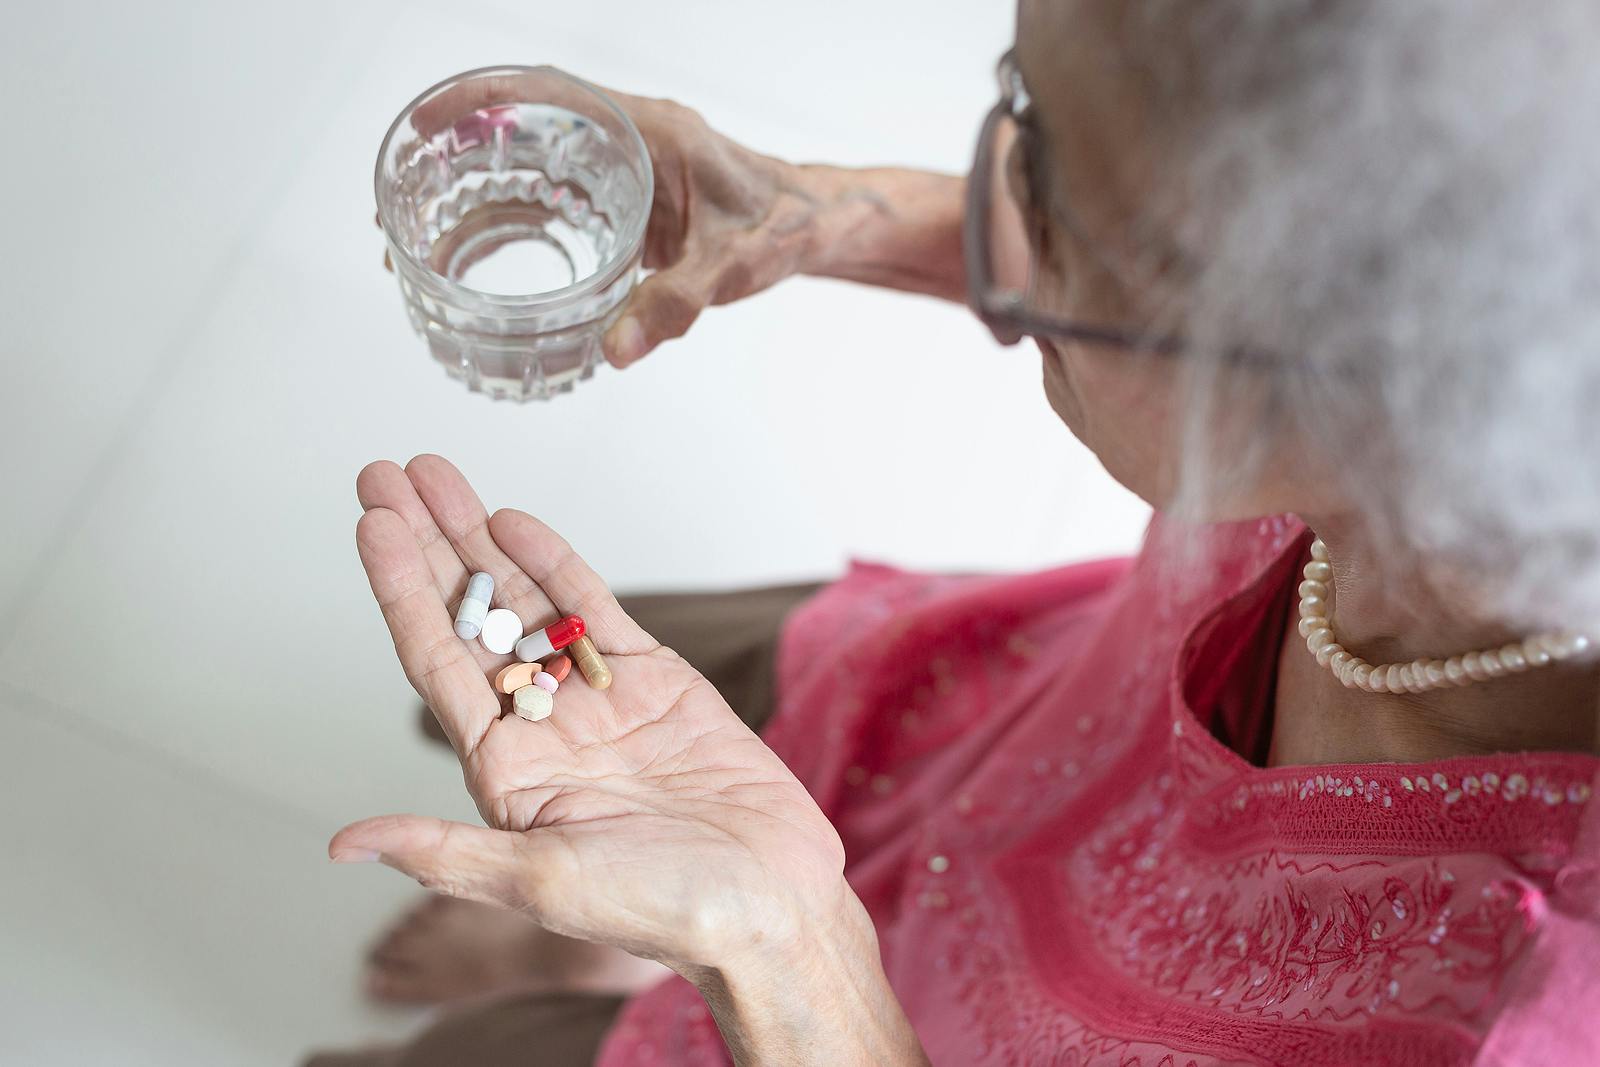 Older woman takes pills, experiences adverse drug reactions